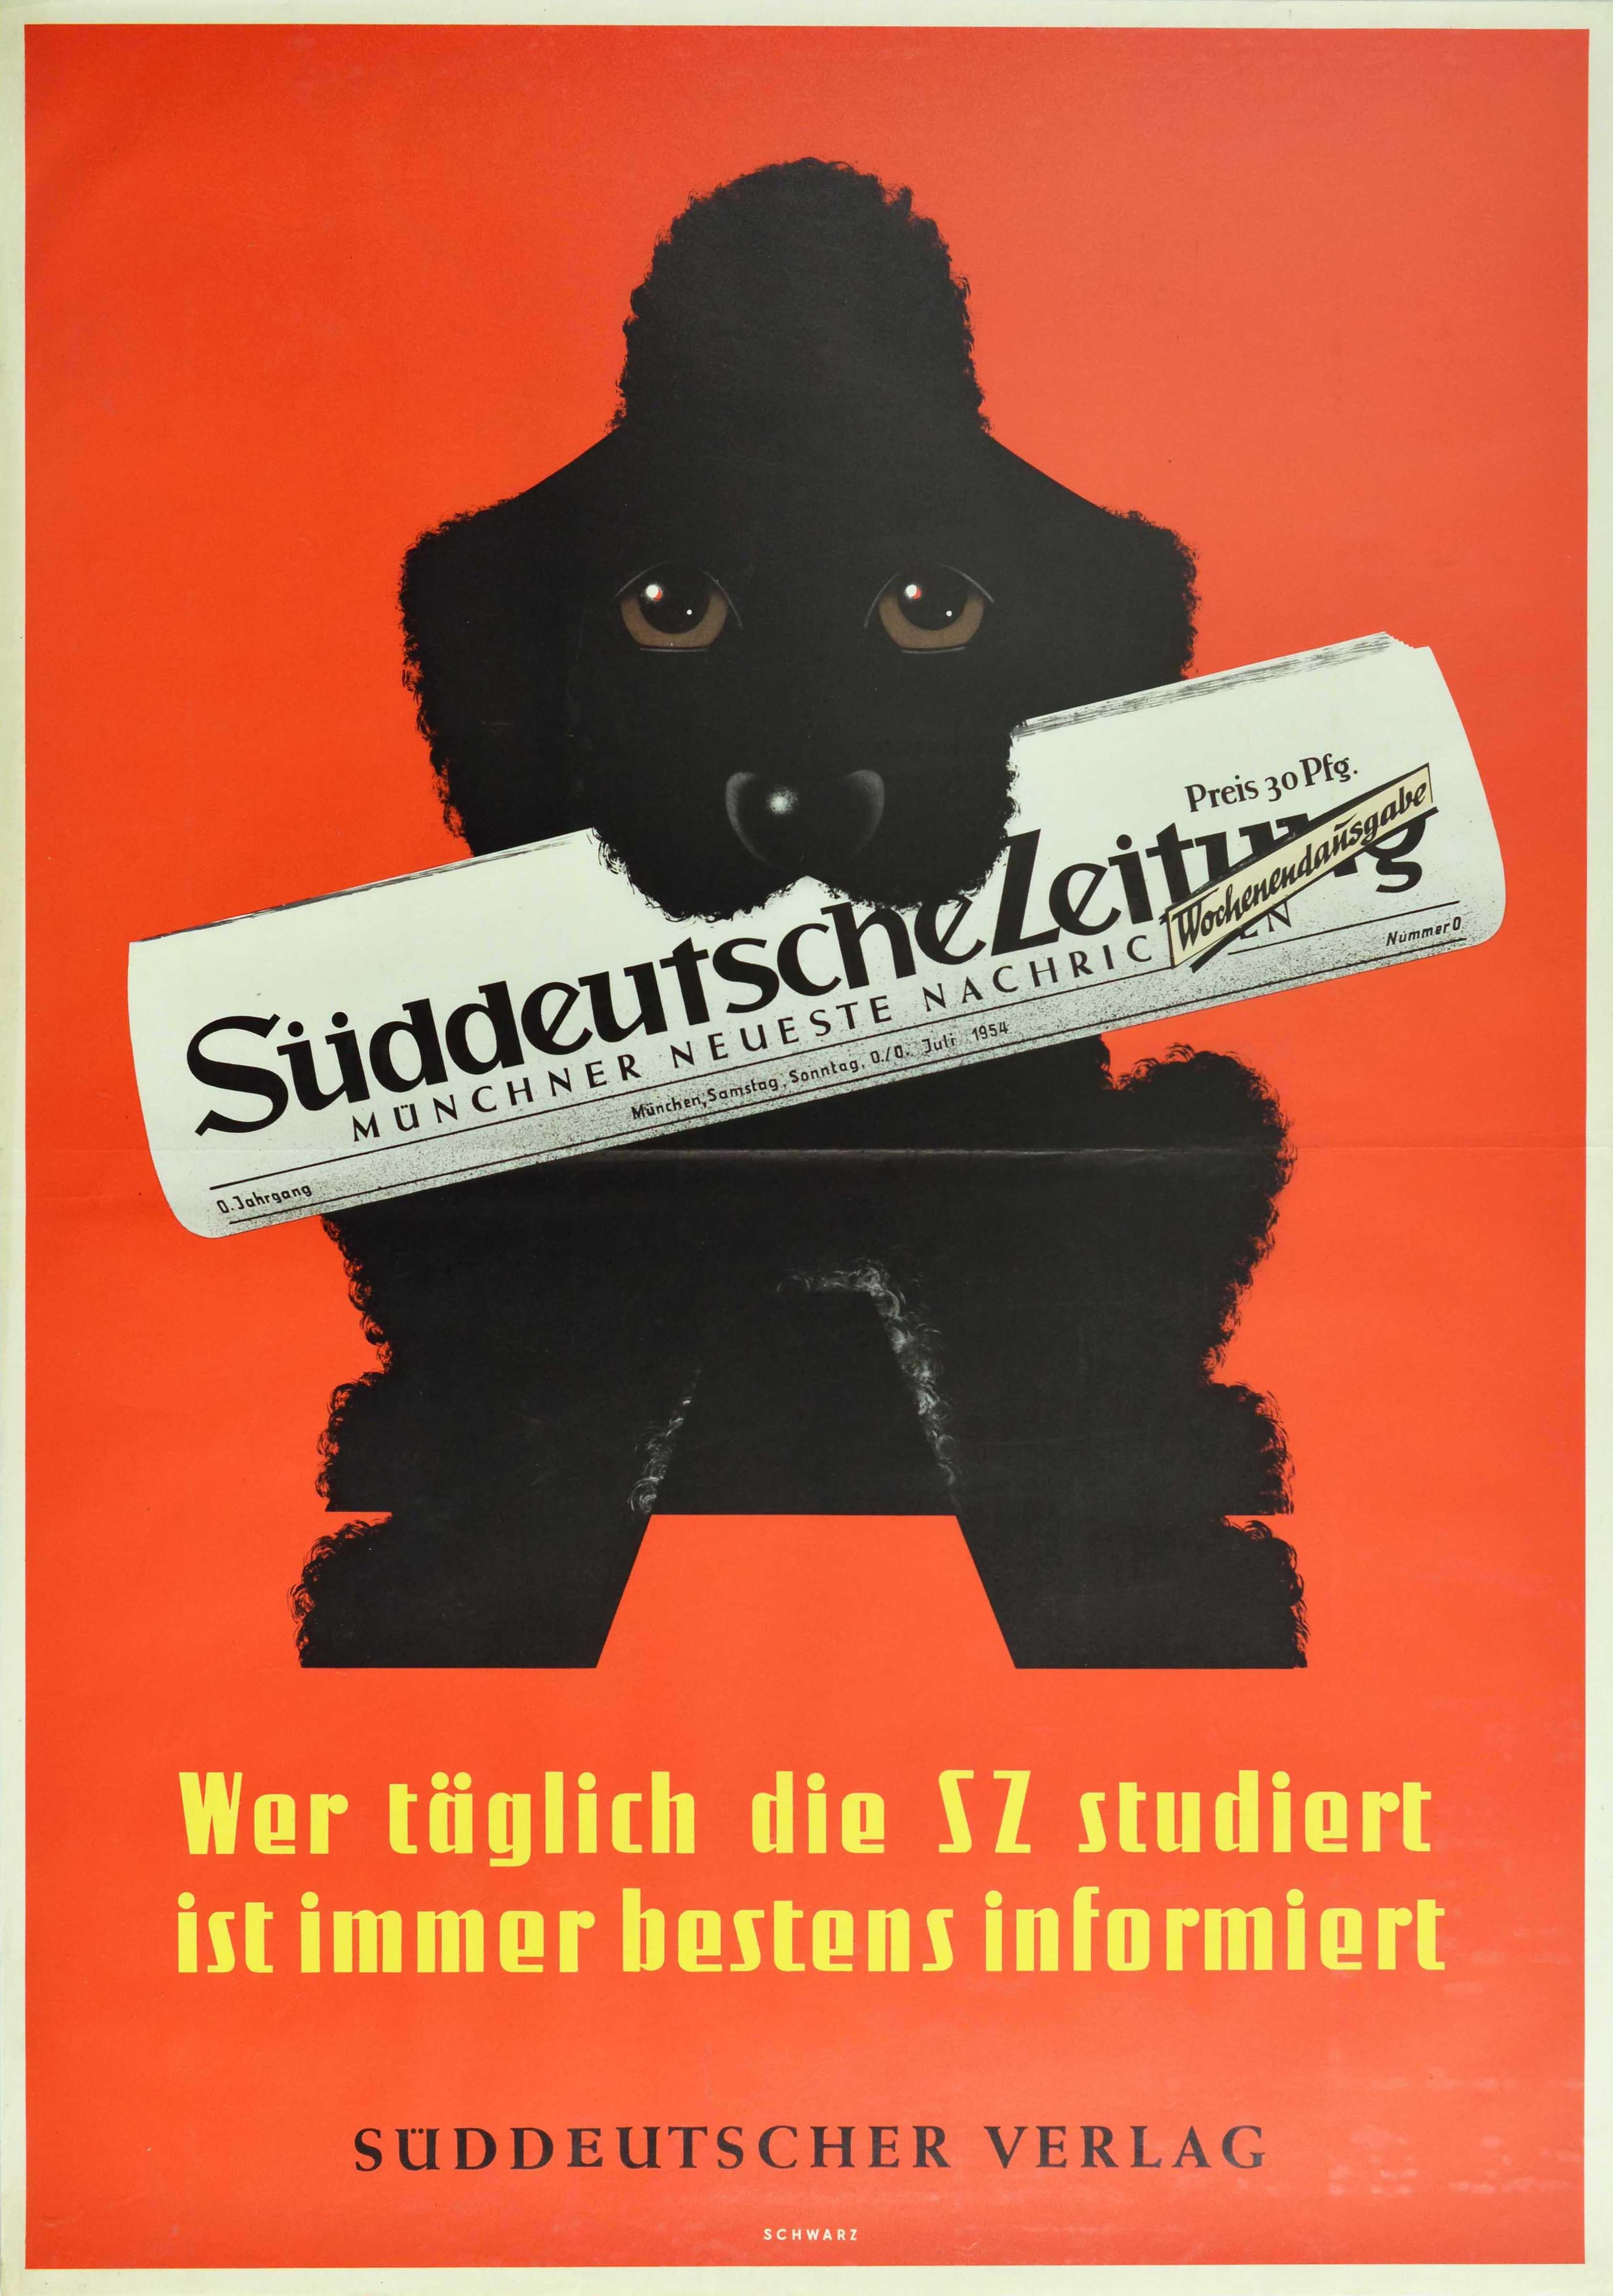 Original vintage advertising poster for Suddeutsche Zeitung / the South German newspaper featuring a black fluffy poodle dog with large eyes looking at the viewer as it sits holding a copy of the weekend newspaper in its mouth, the caption in yellow